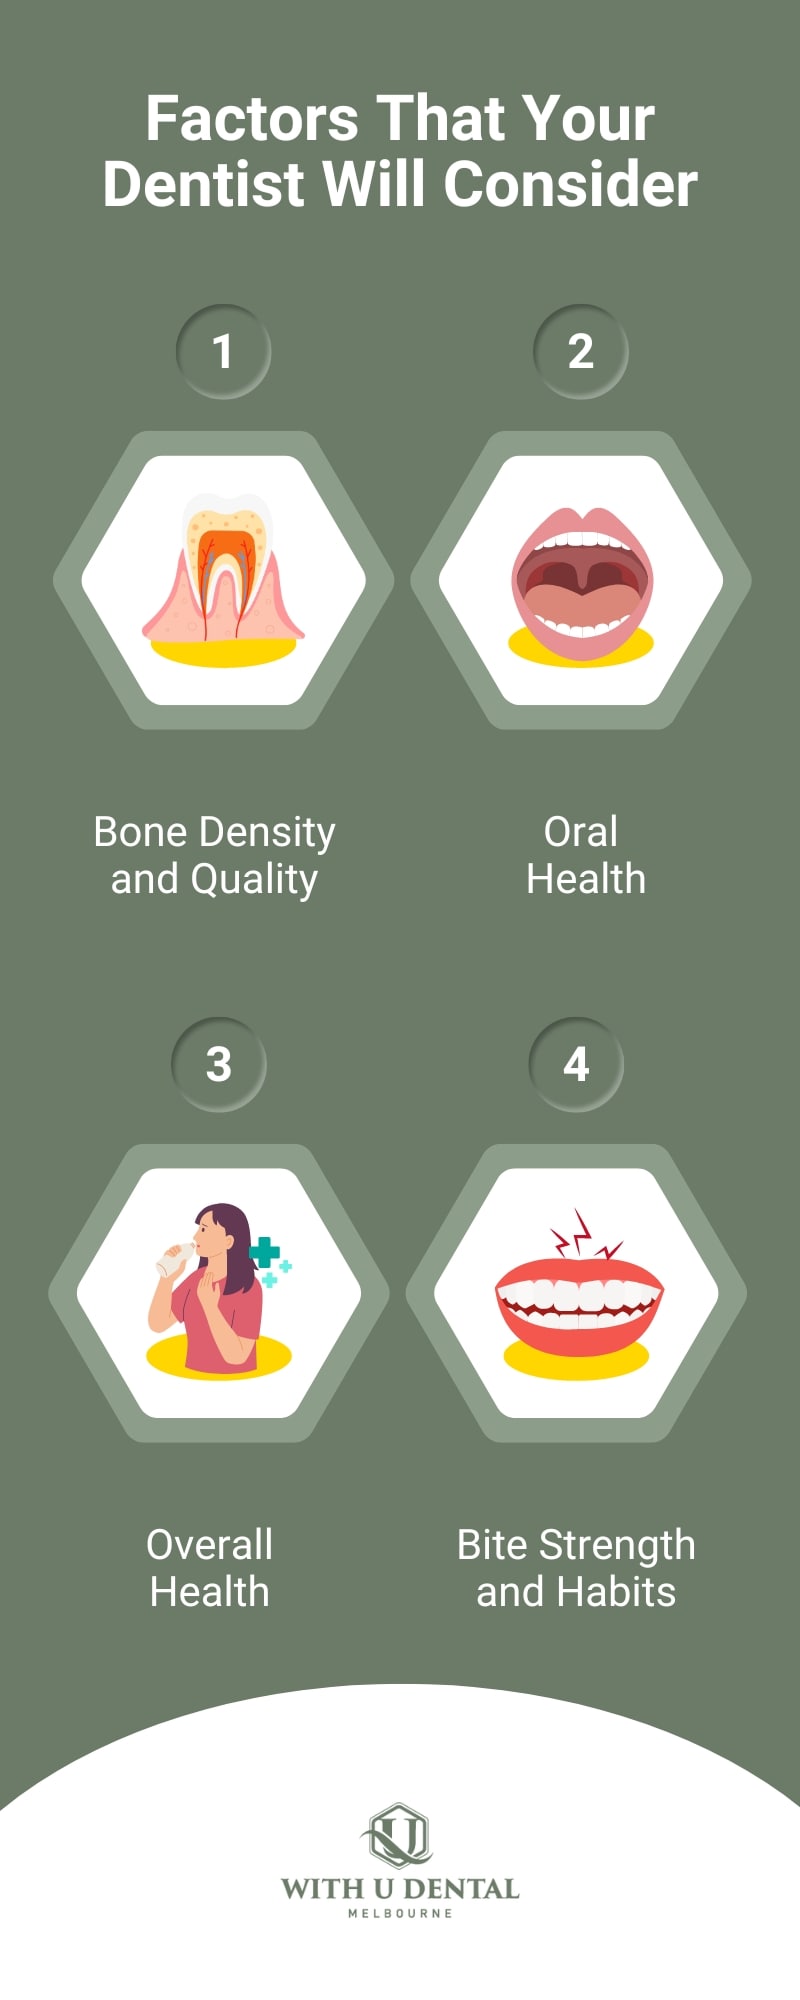 Factors That Your Dentist Will Consider